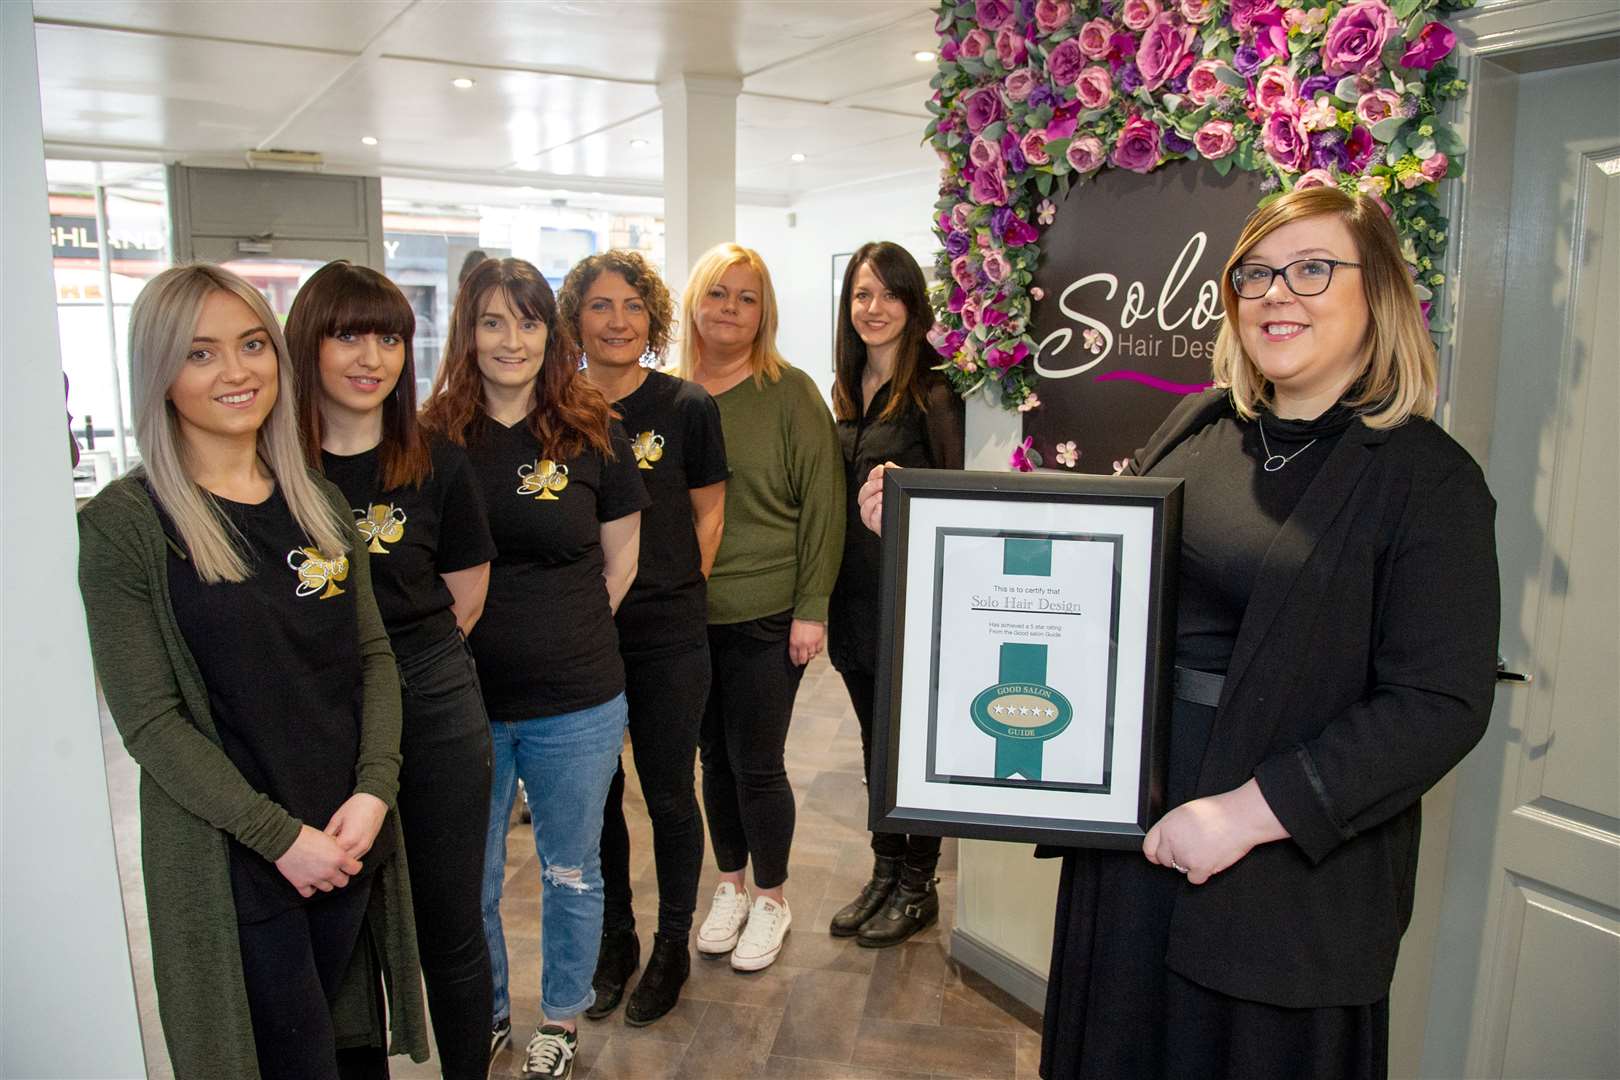 Solo Hair Design owner Lisa Lawrence (right) with staff (from left) Lisa Piper, Lauren MacDonald, Natalie Gilchrist, Wendy Davidson, Joanne Hair and Dannielle Davies.